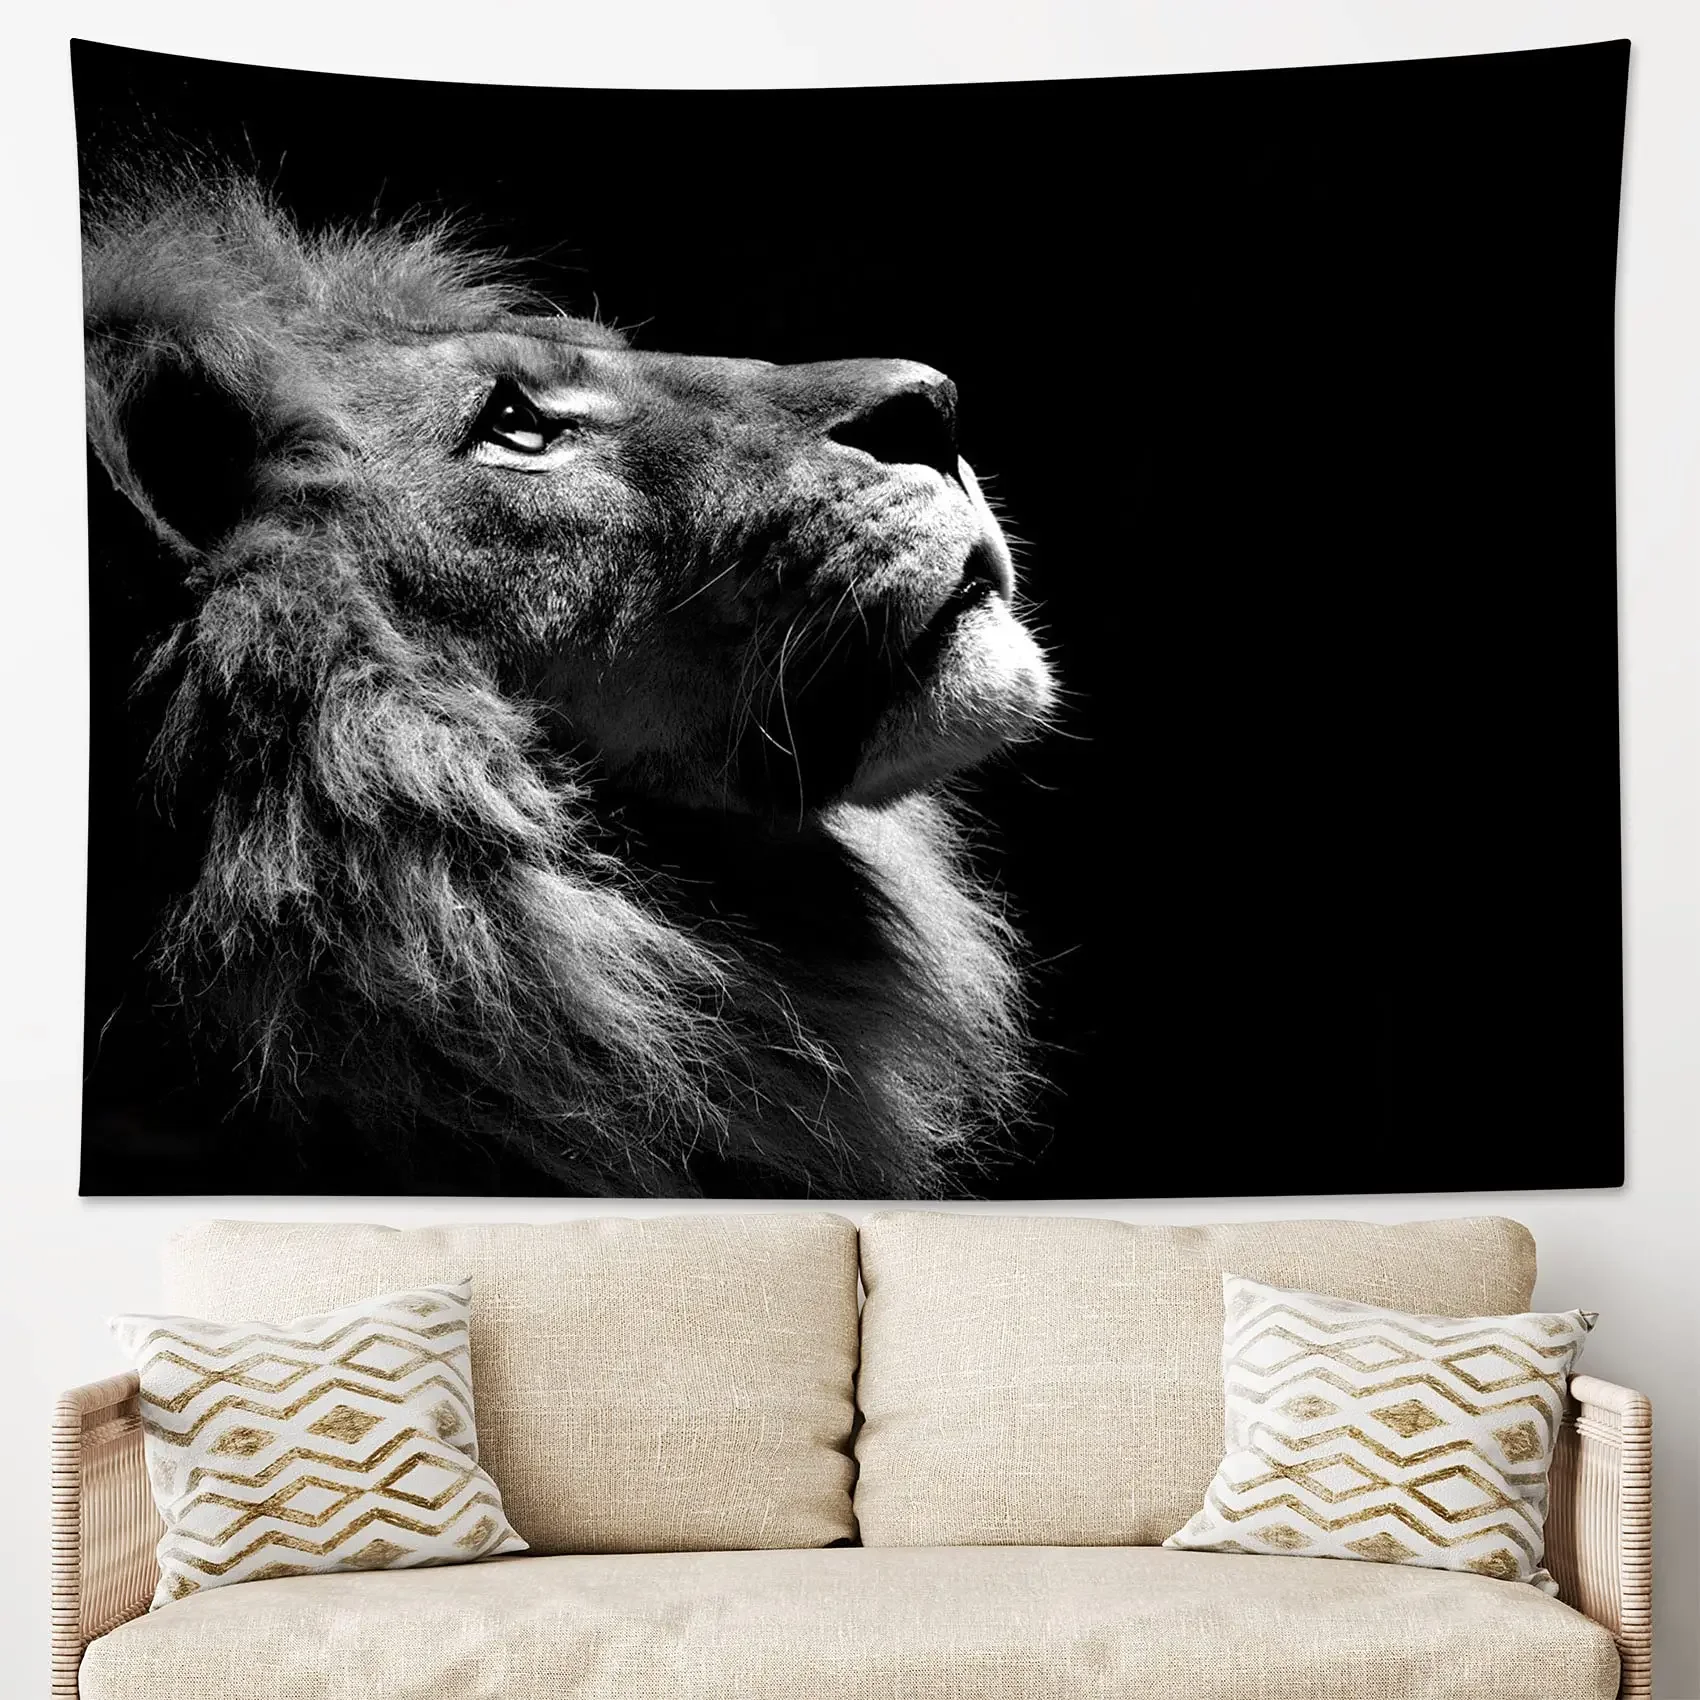 

Lion Tapestry Wild Animal Tapestry African Lion Black and White Tapestry Wall Hanging for Bedroom Living Room Dorm Home Decor